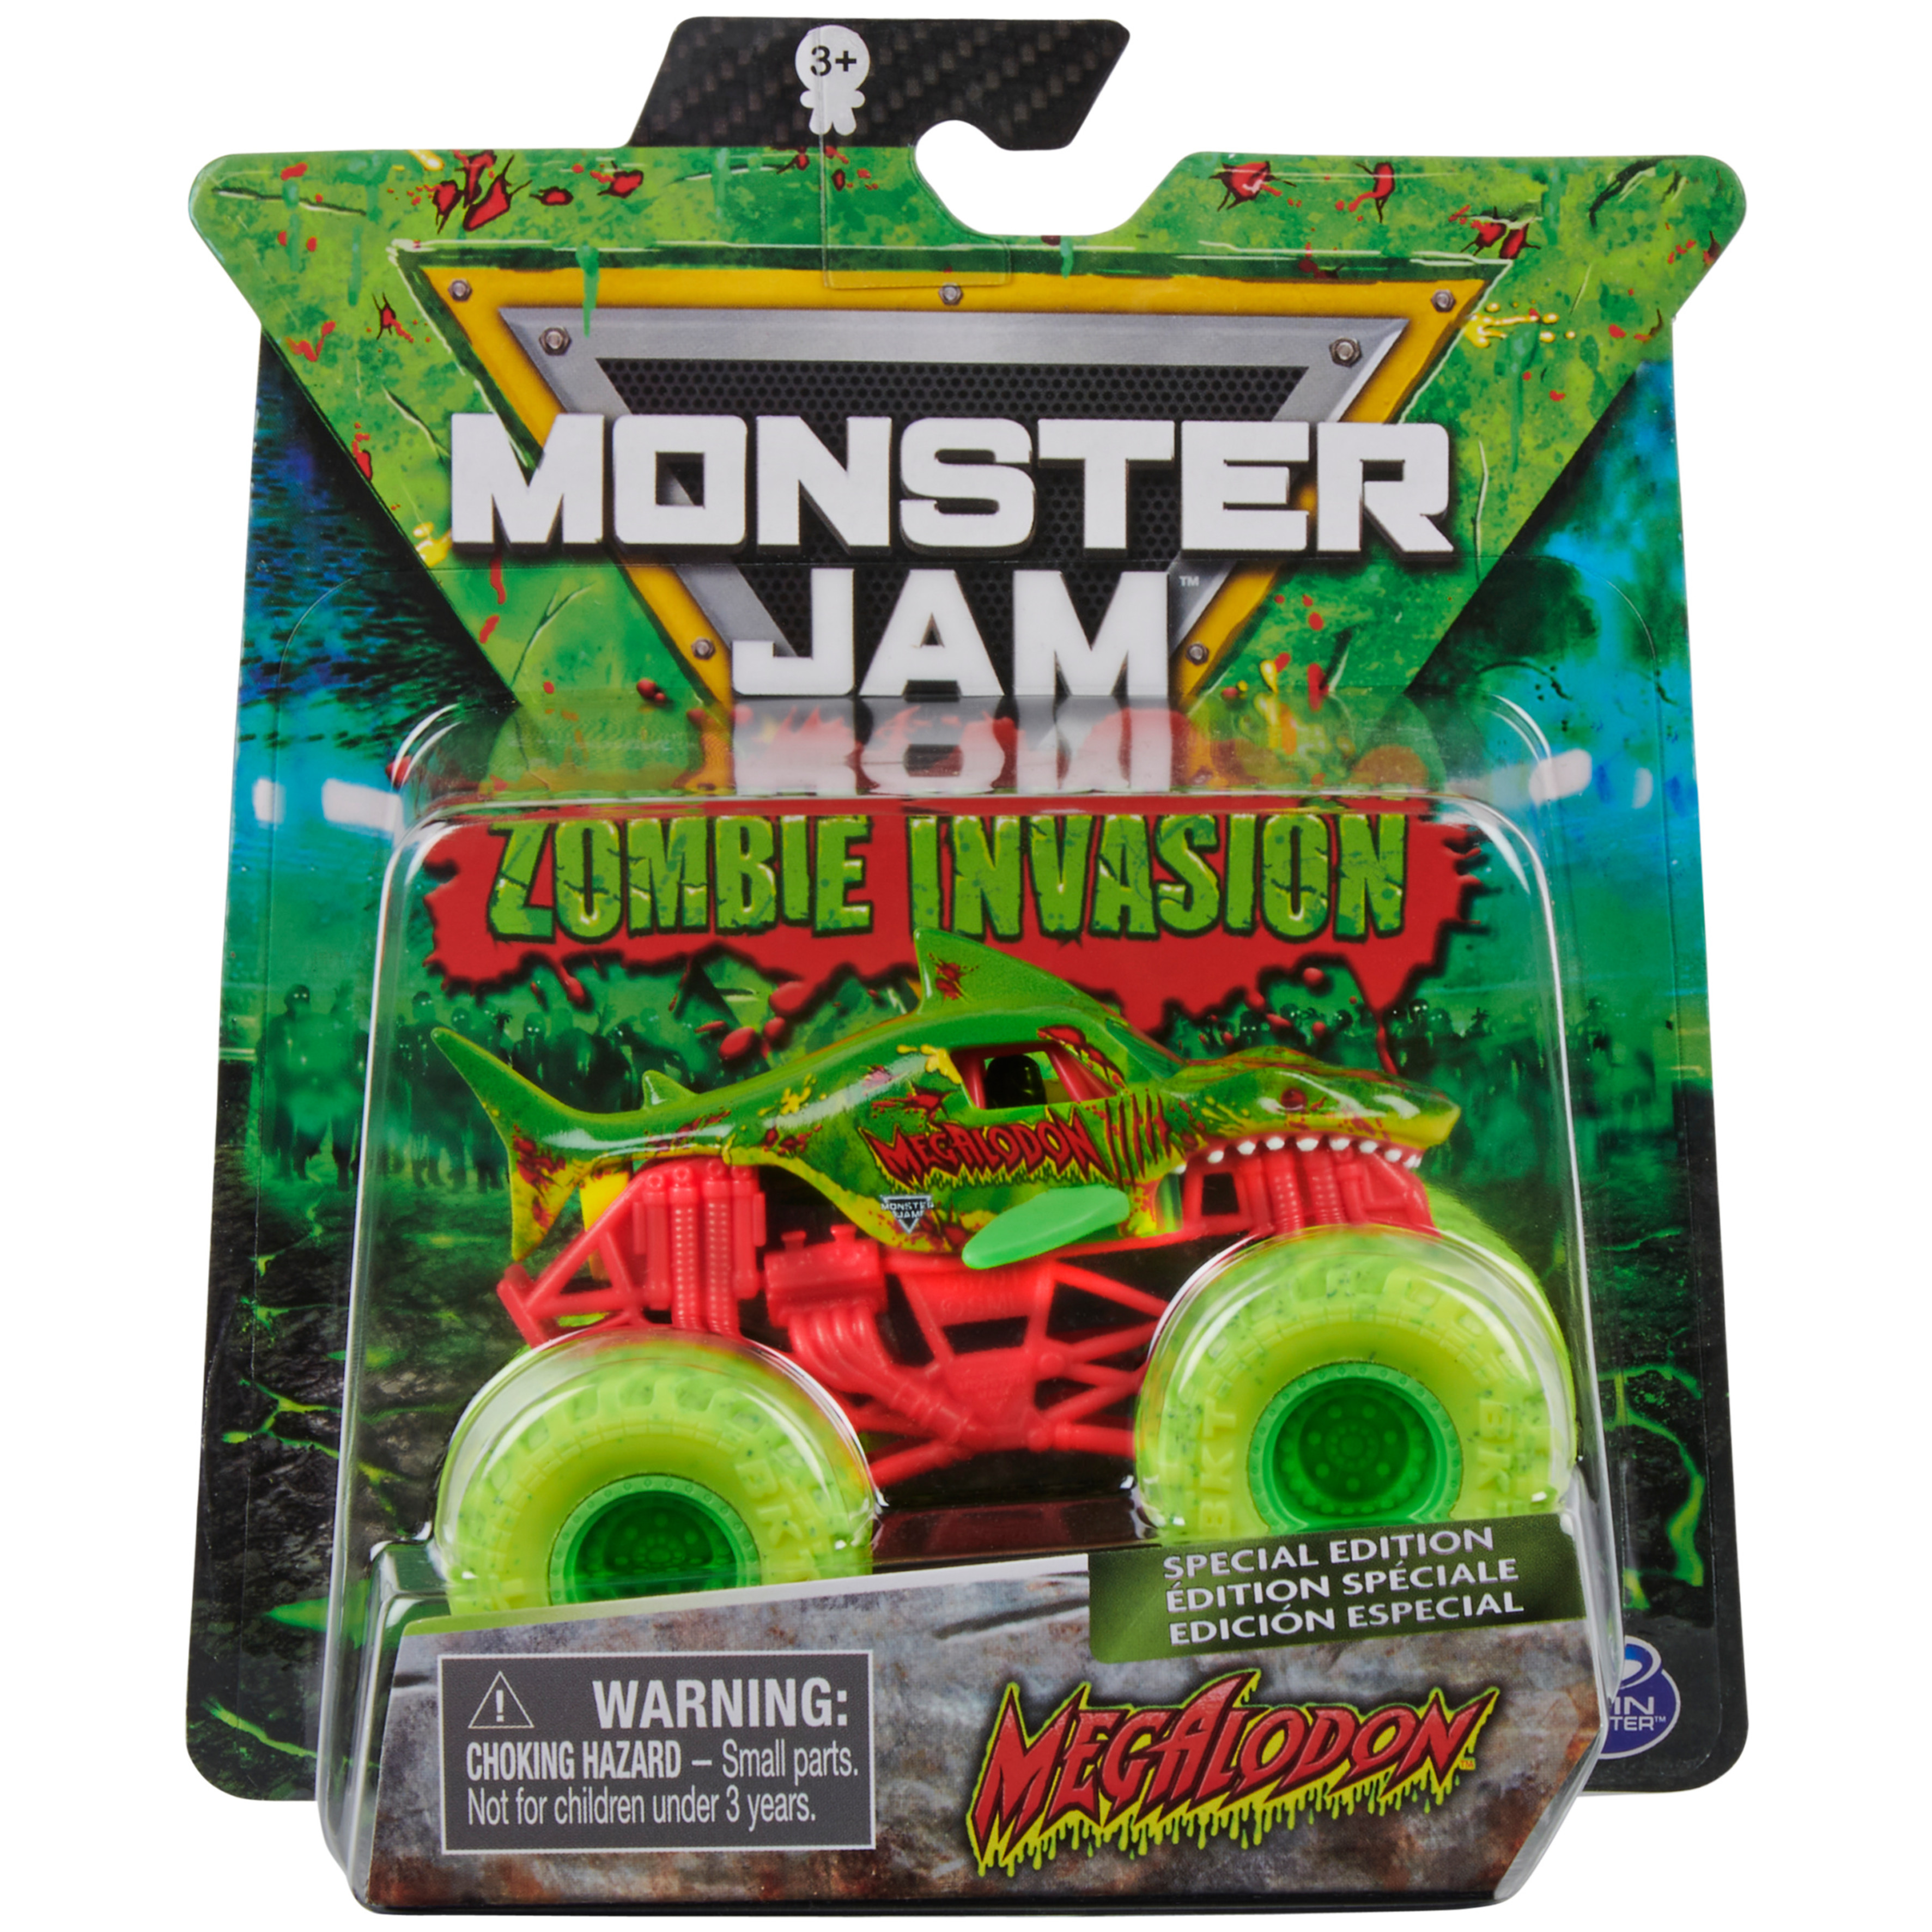 Monster Jam Gears and Galaxies Die-Cast Monster Truck, 1:64 Scale (Styles May Vary) - image 1 of 7